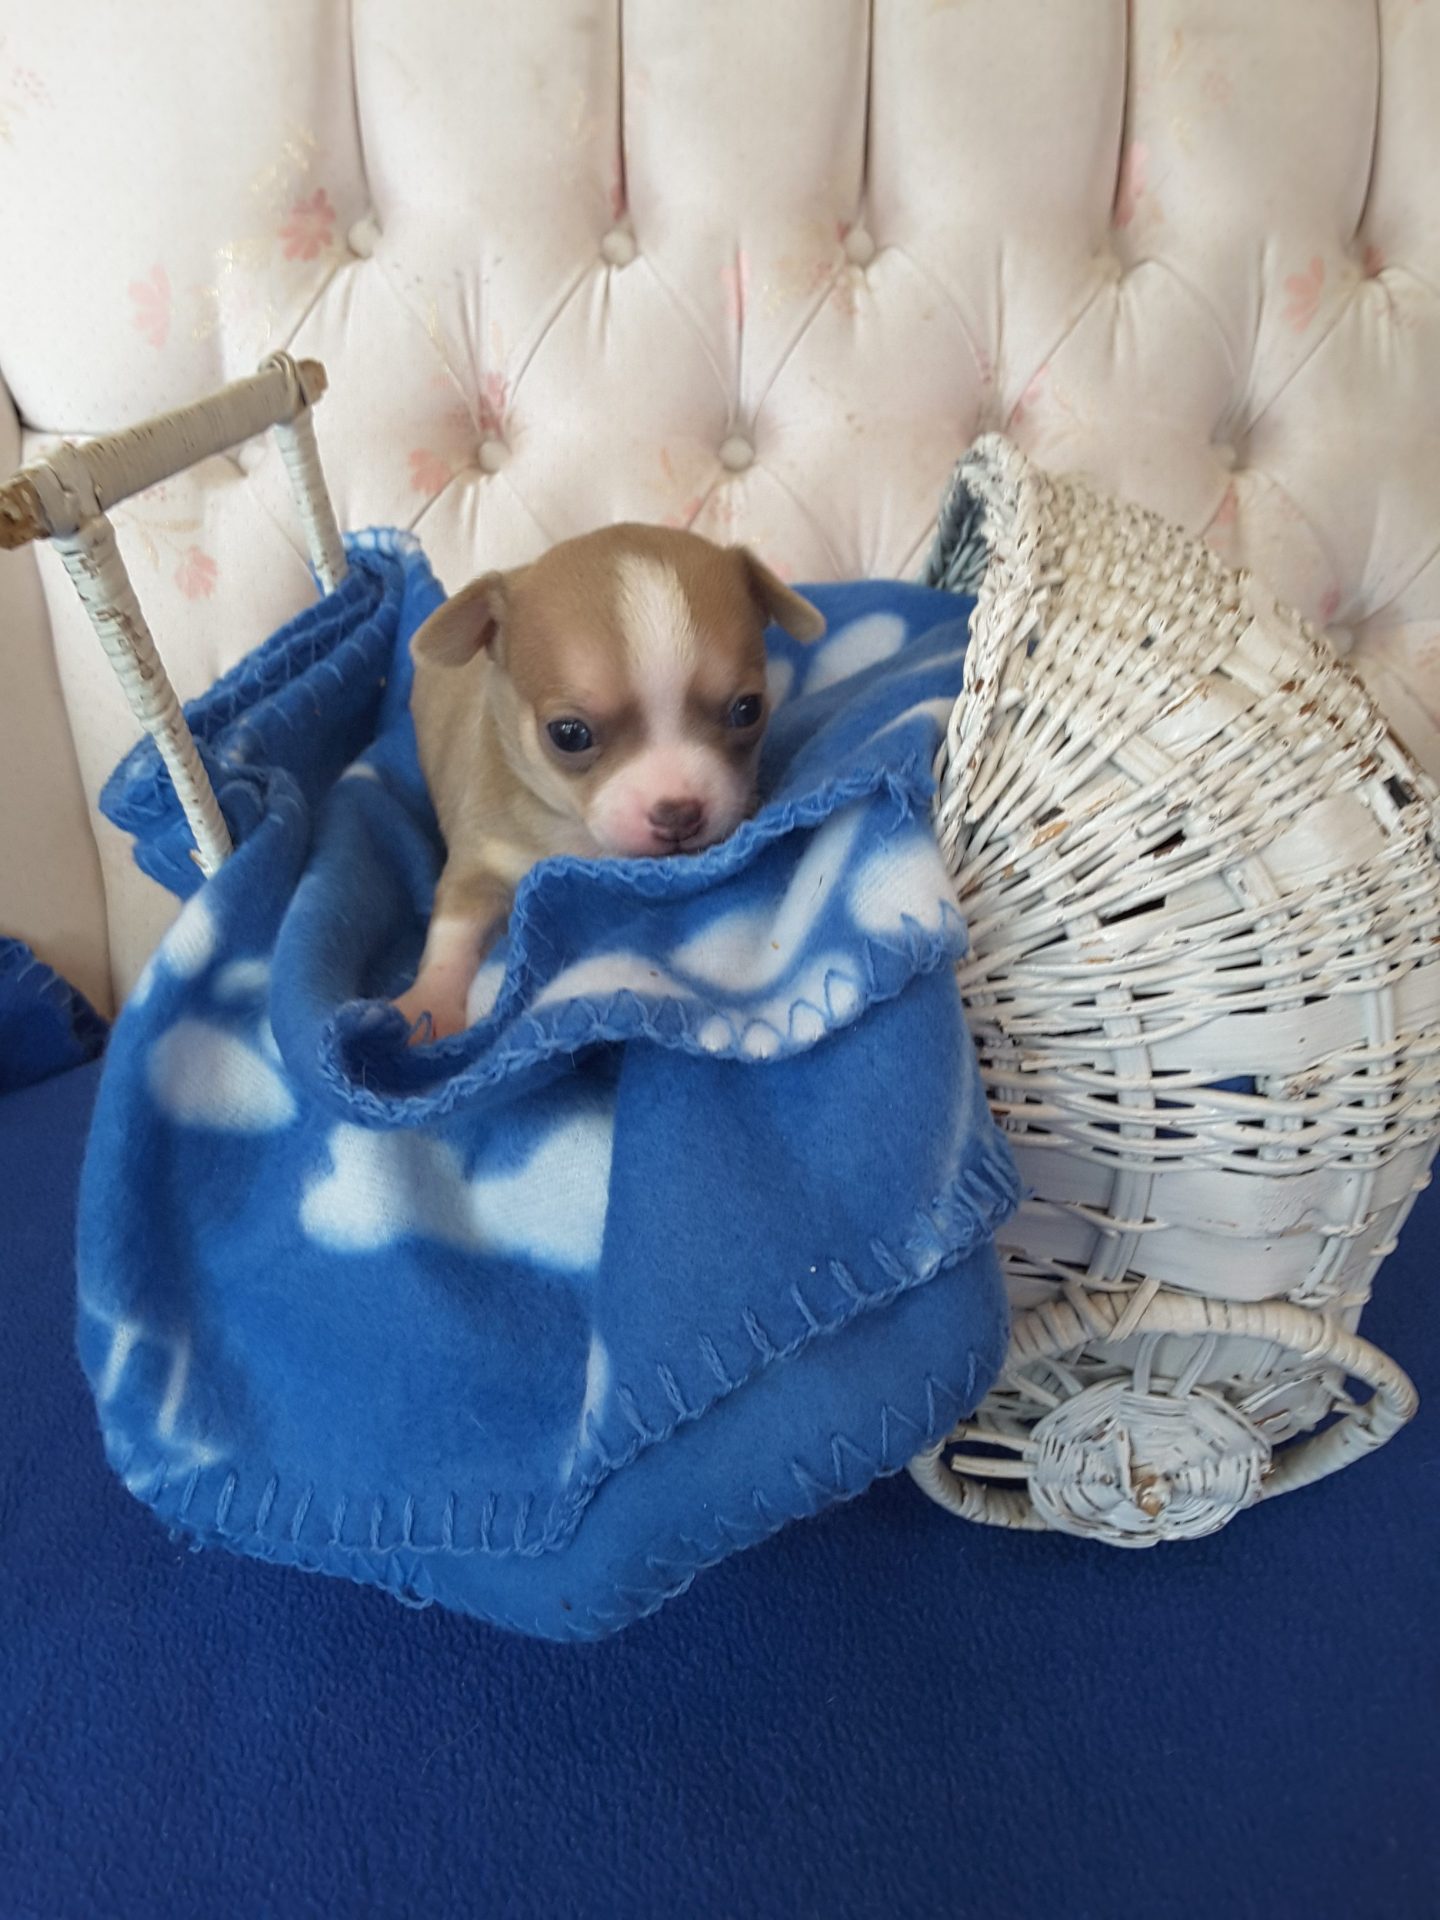 Long Hair Teacup Chihuahua Puppies for Sale in Ottawa, Canada | Sunsets ...